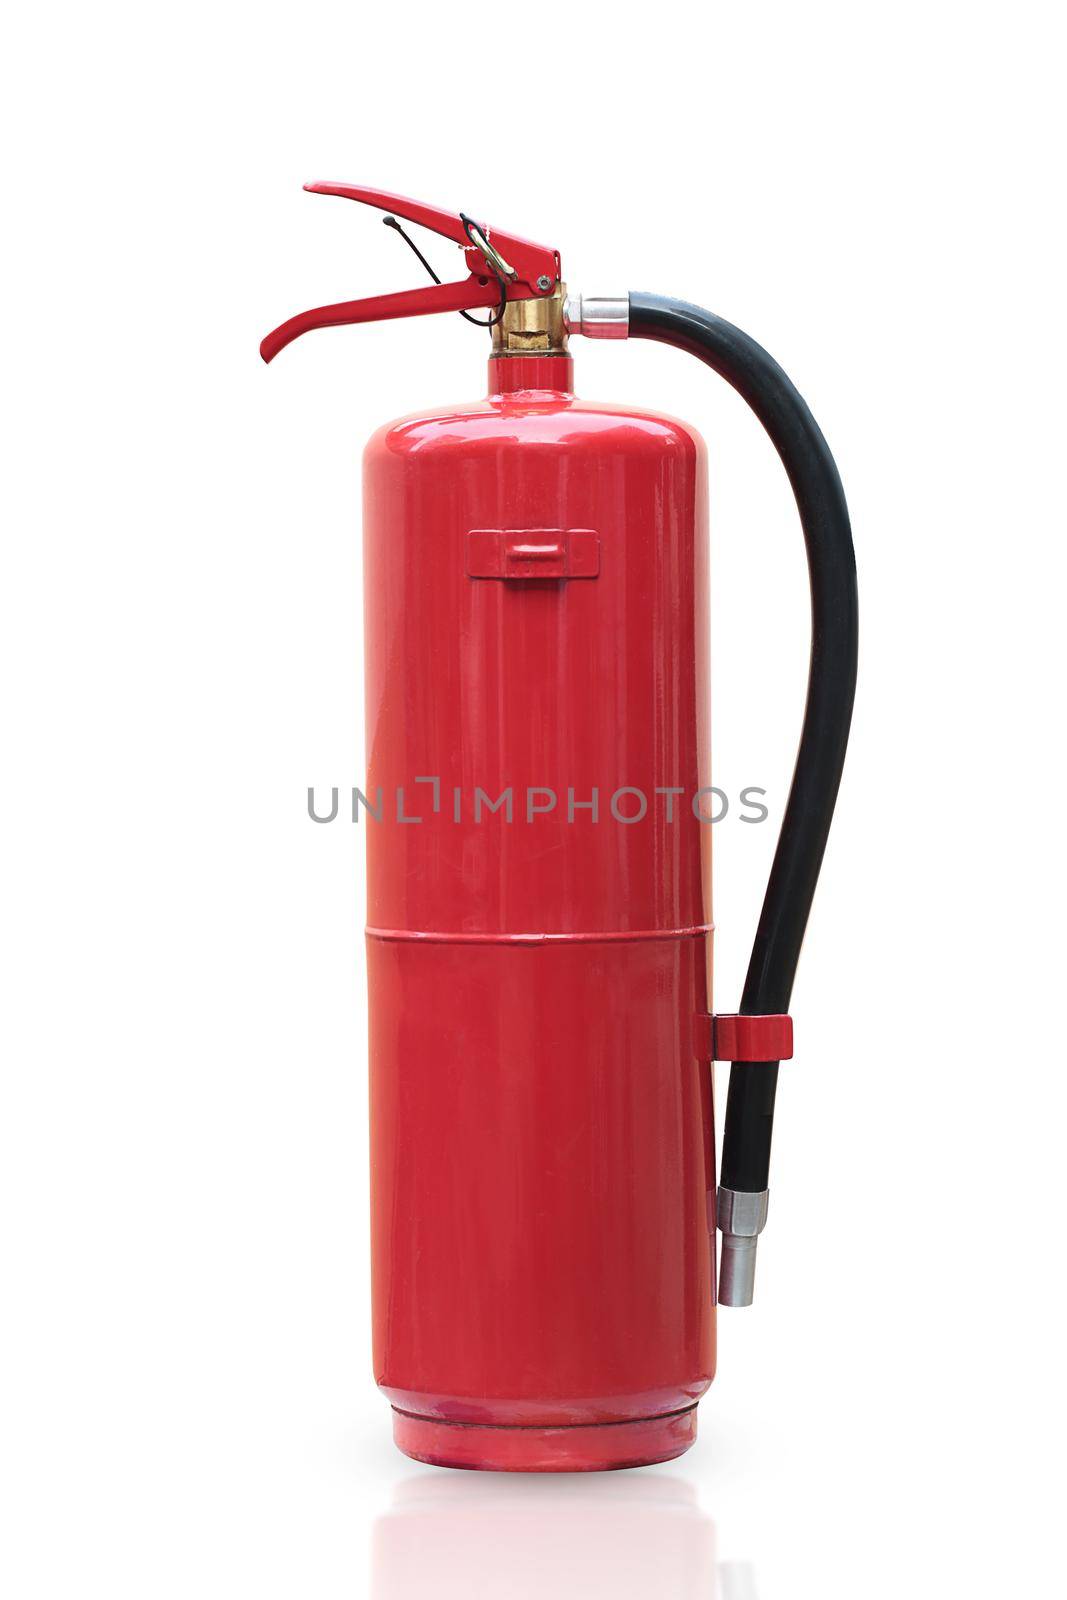 Fire extinguisher red tank isolated white background.